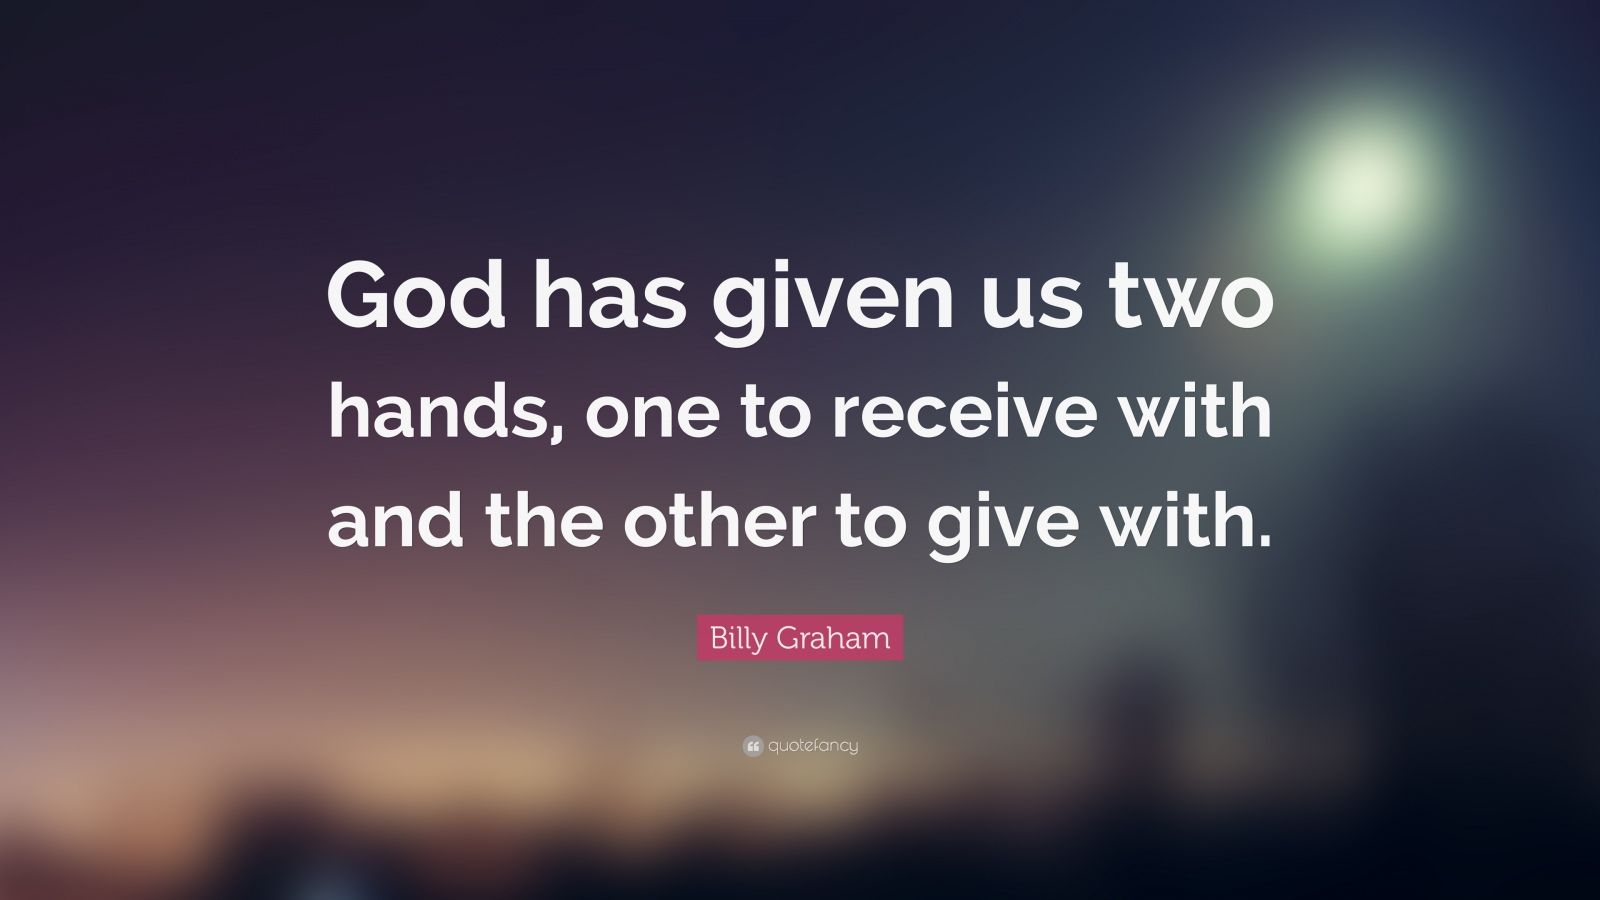 34675-Billy-Graham-Quote-God-has-given-us-two-hands-one-to-receive-with.jpg